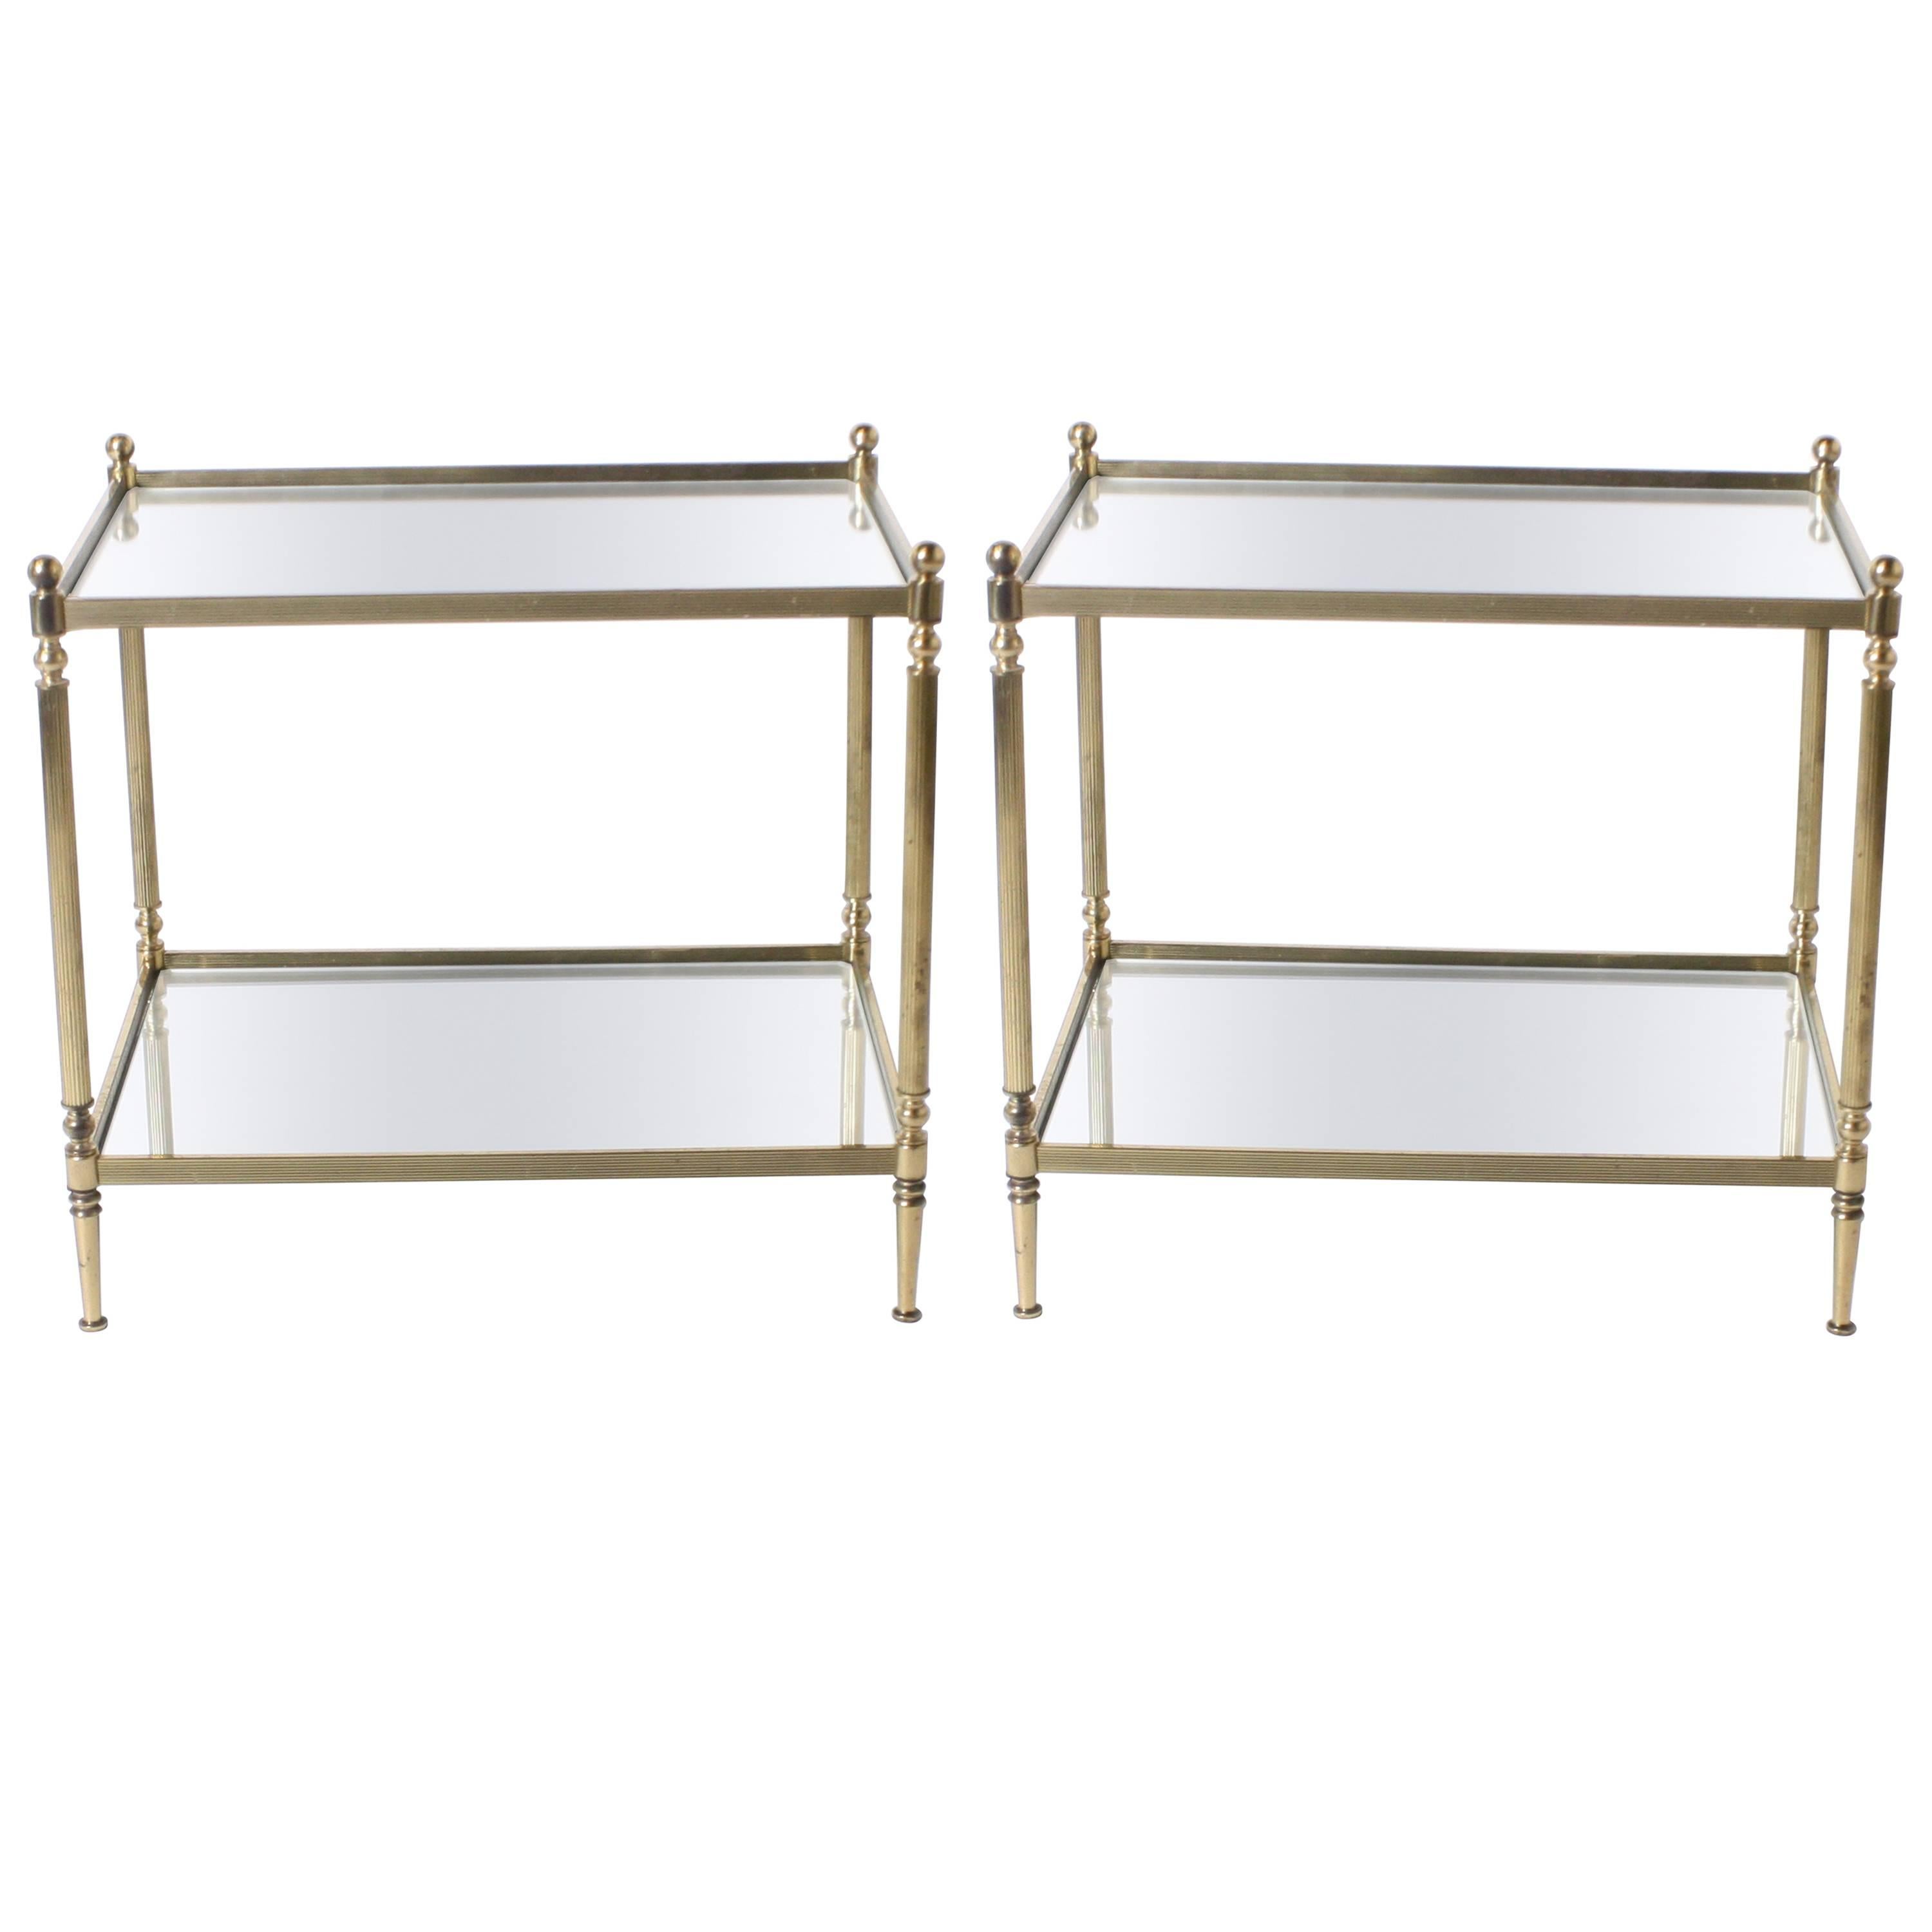 Pair of Brass Tables with Mirror Tops in the Style of Maison Jansen, circa 1950